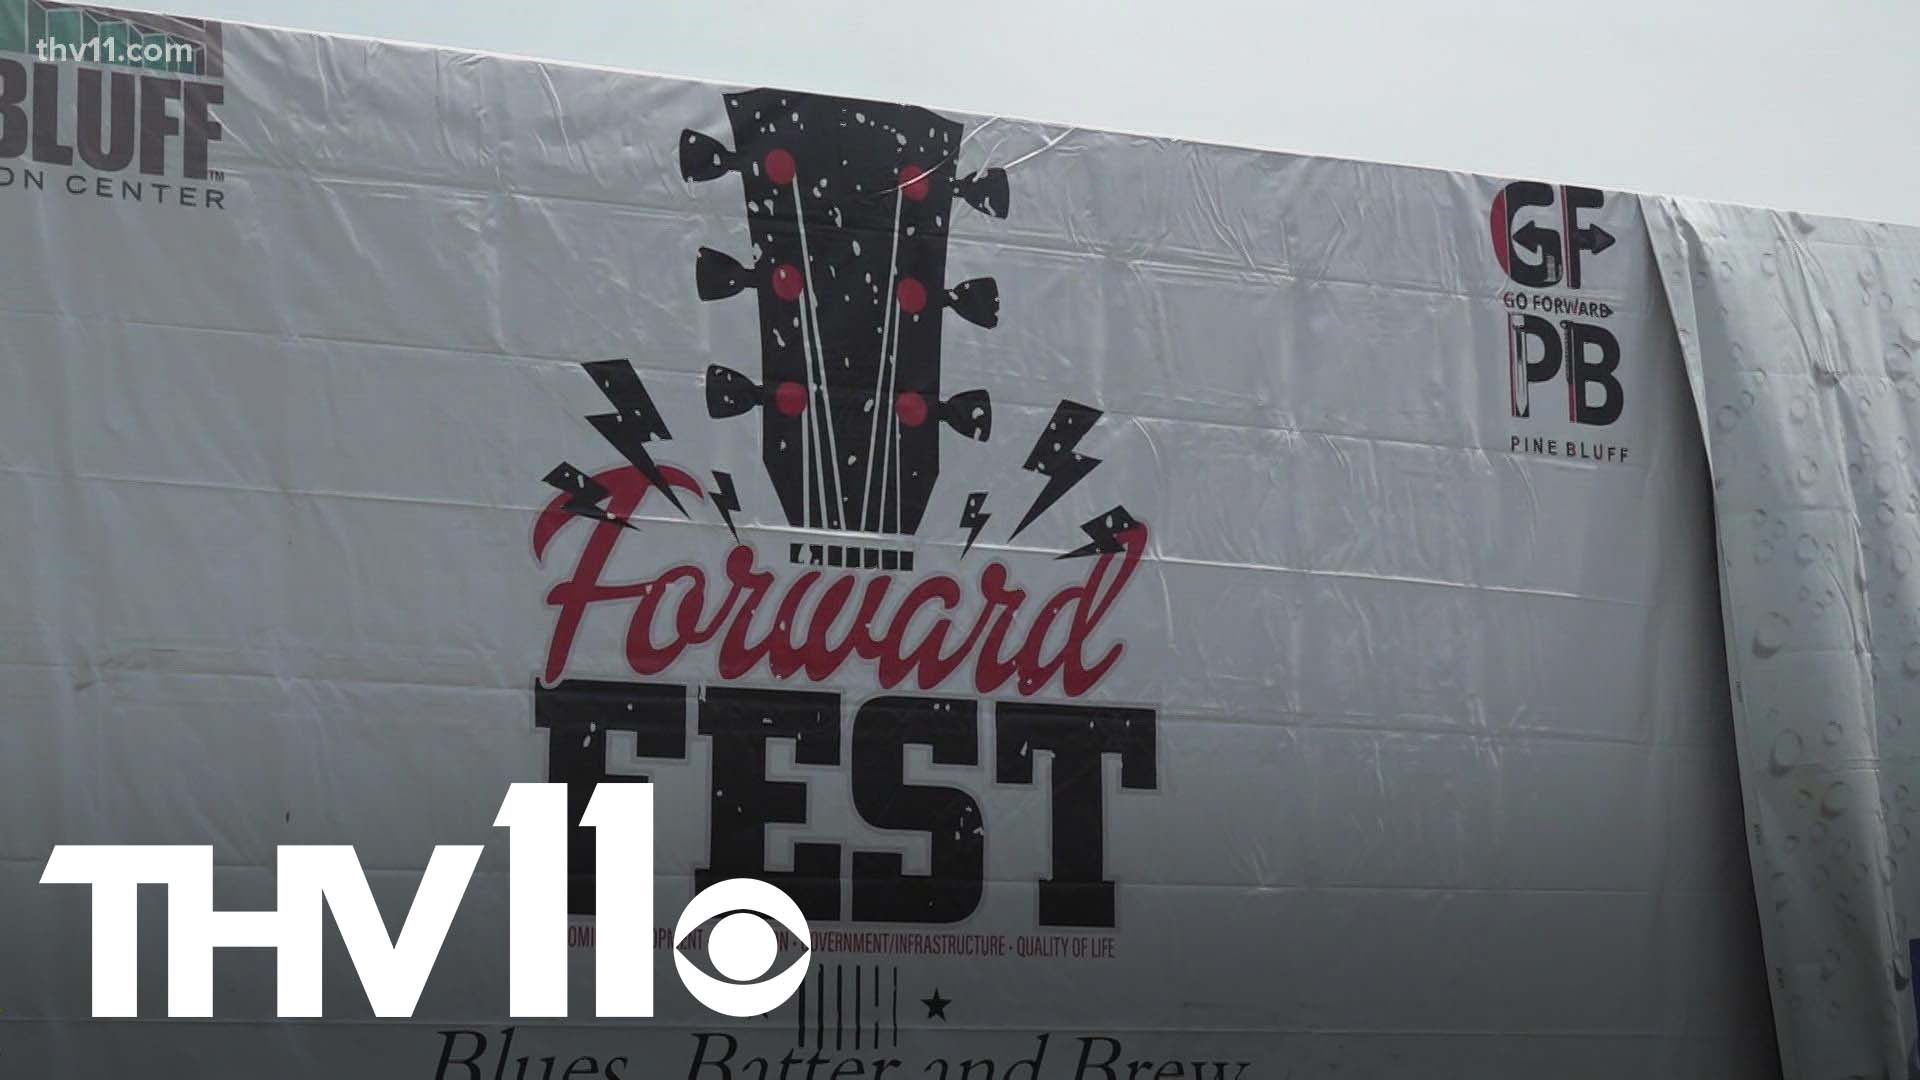 The Forward Fest is one of the biggest events in Pine Bluff, aimed at bringing members of the community together.